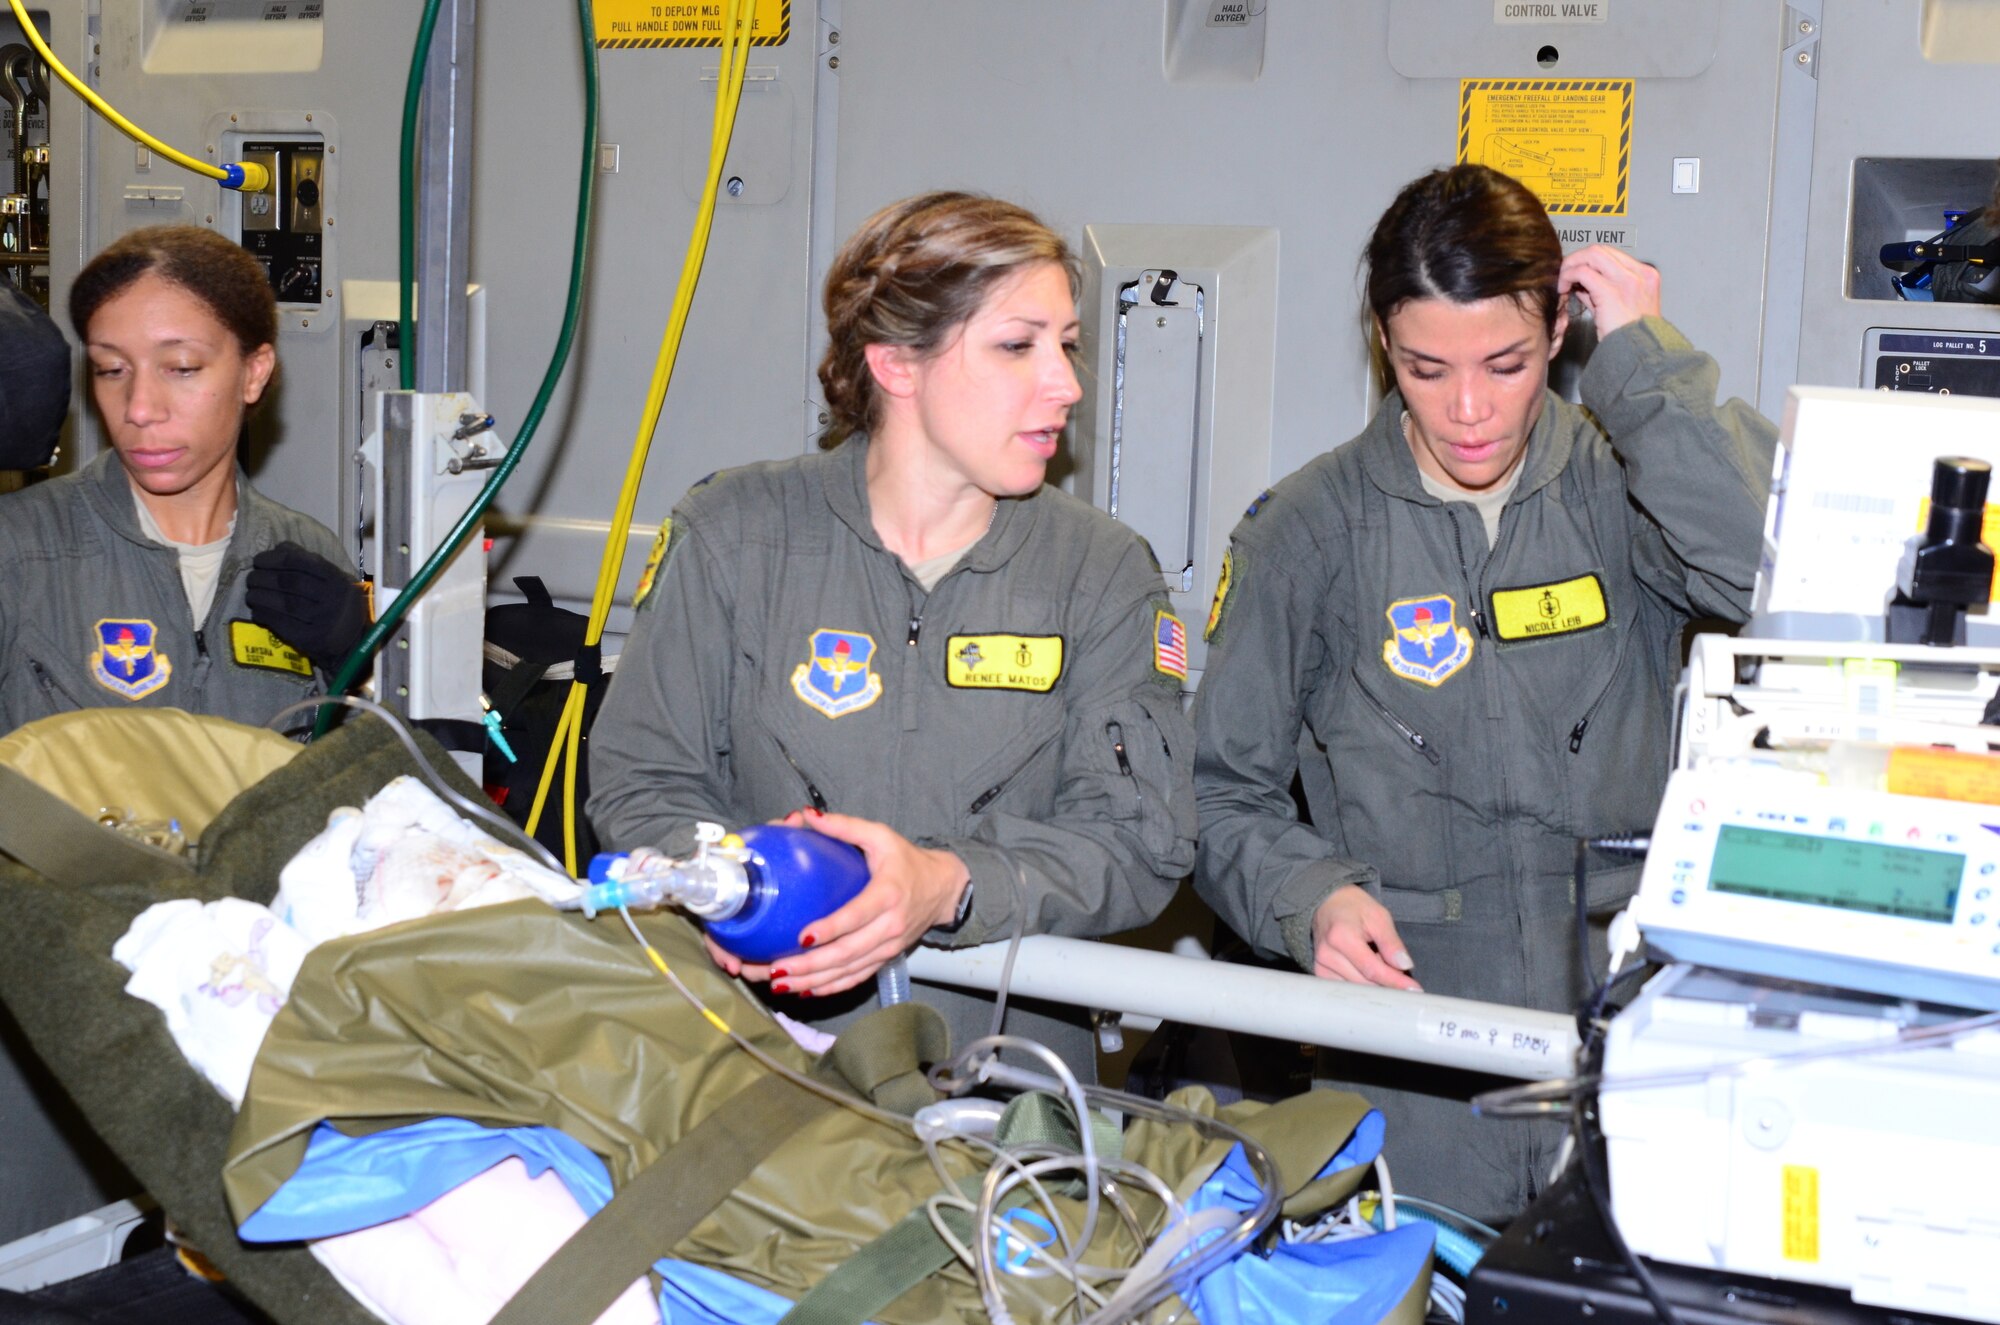 A joint medical team from the Mississippi Air National Guard’s 183rd Air Evacuation Squadron and Joint Base San Antonio, Texas, provides en route medical treatment to six injured children during a U.S. Air Force humanitarian aeromedical evacuation mission from Guatemala to Galveston, Texas, June 6, 2018. The children were taken to the Shriners Hospital for Children to receive further care for burns and other injuries sustained during the recent Fuego Volcano eruption. (U.S. Air National Guard photo by Tech. Sgt. Edward Staton)